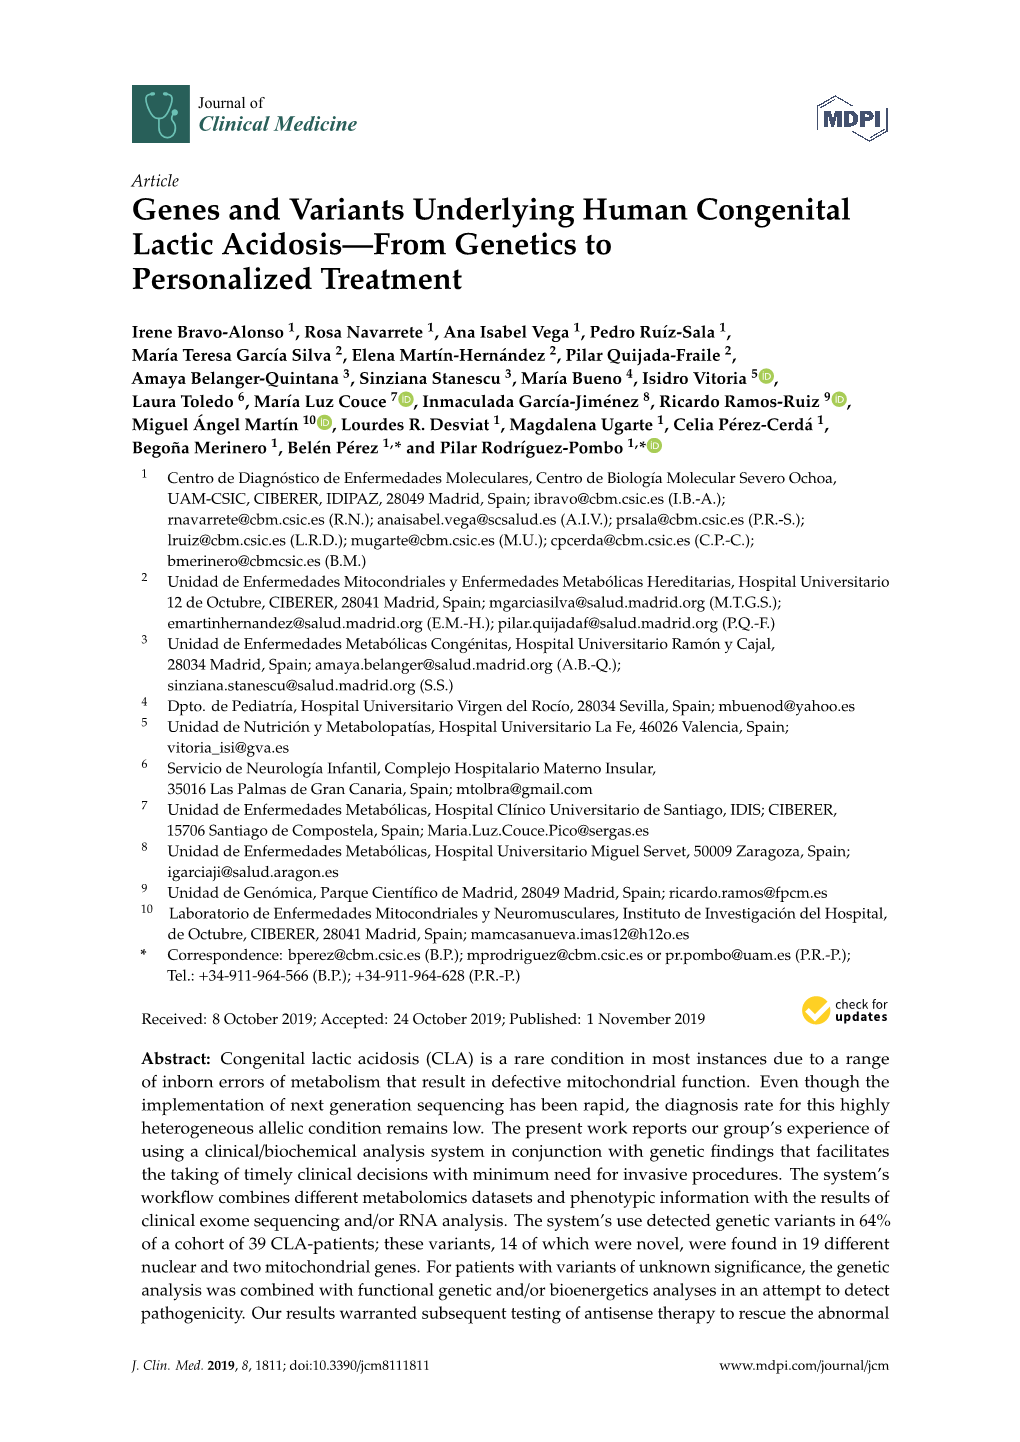 Genes and Variants Underlying Human Congenital Lactic Acidosis—From Genetics to Personalized Treatment